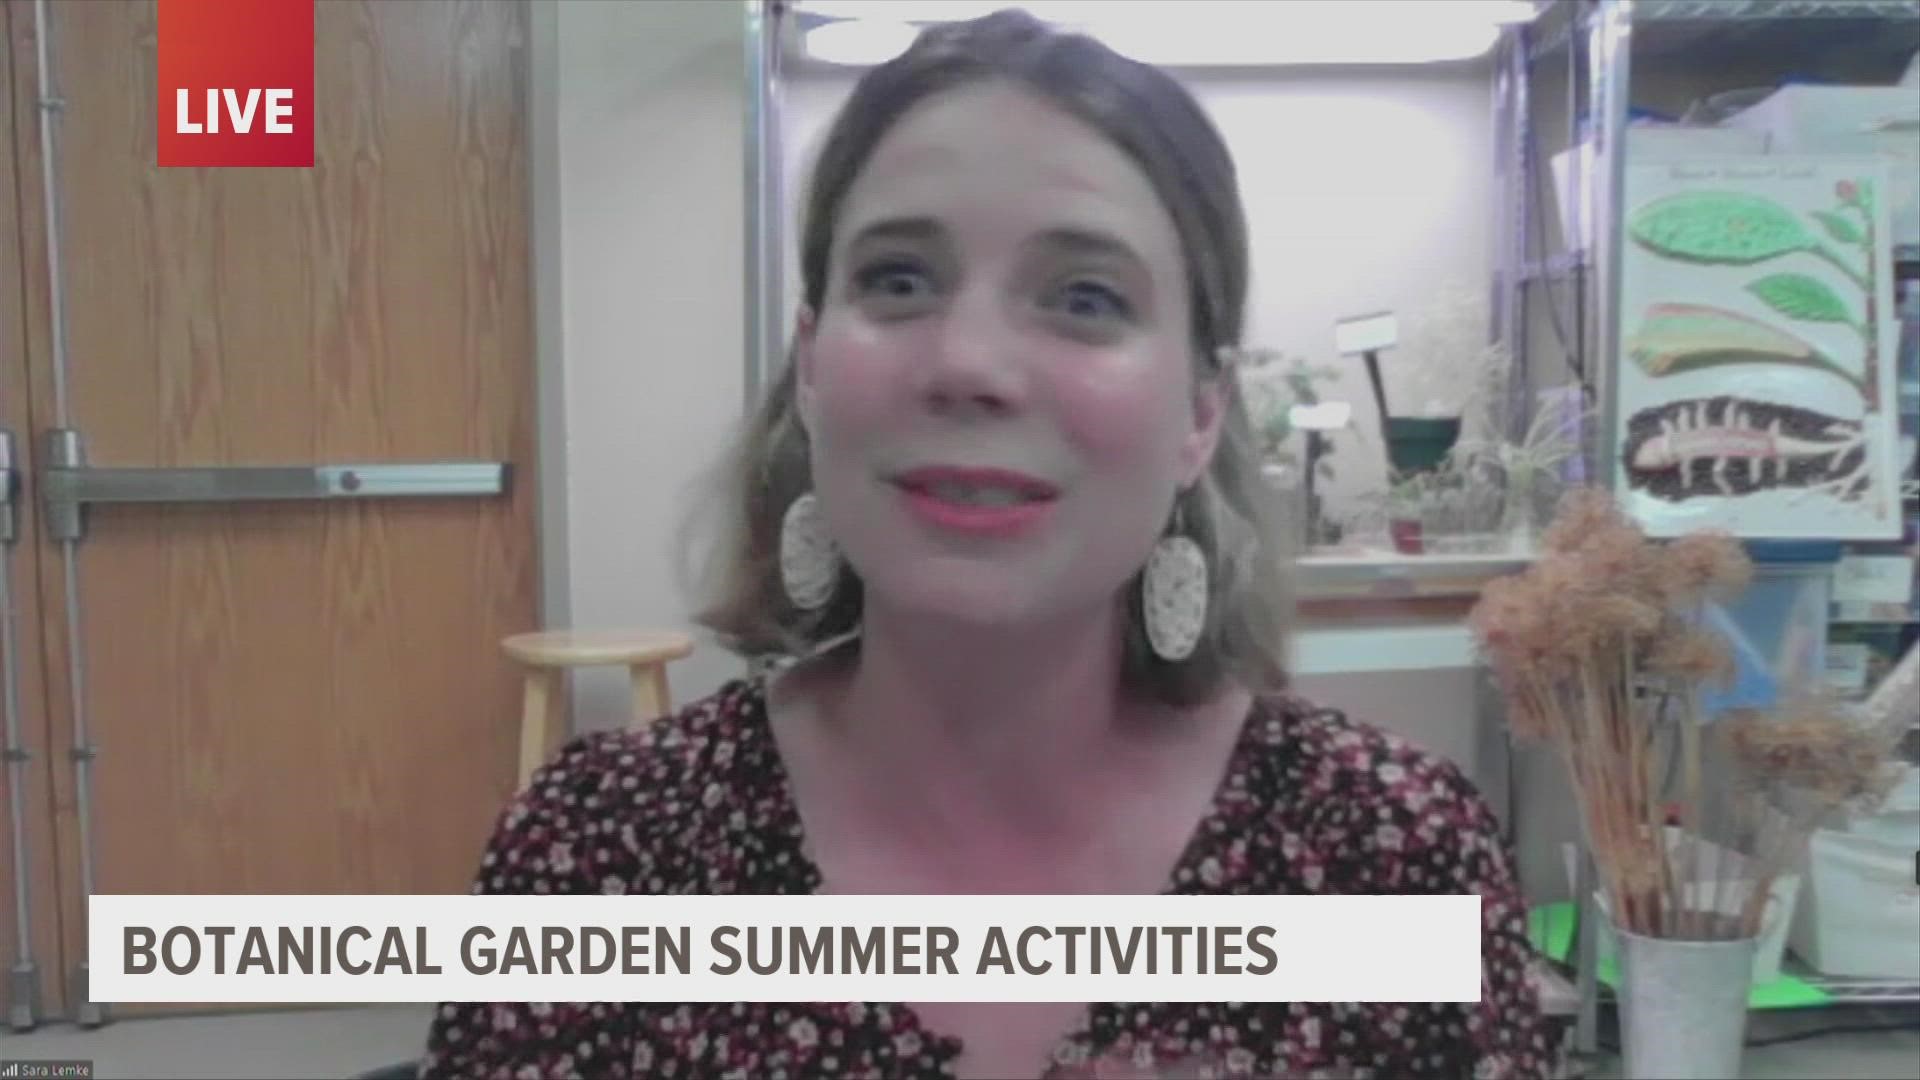 Sara Lemke with the Greater Des Moines Botanical Garden explains an opportunity for people to see their facilities for free this Saturday.